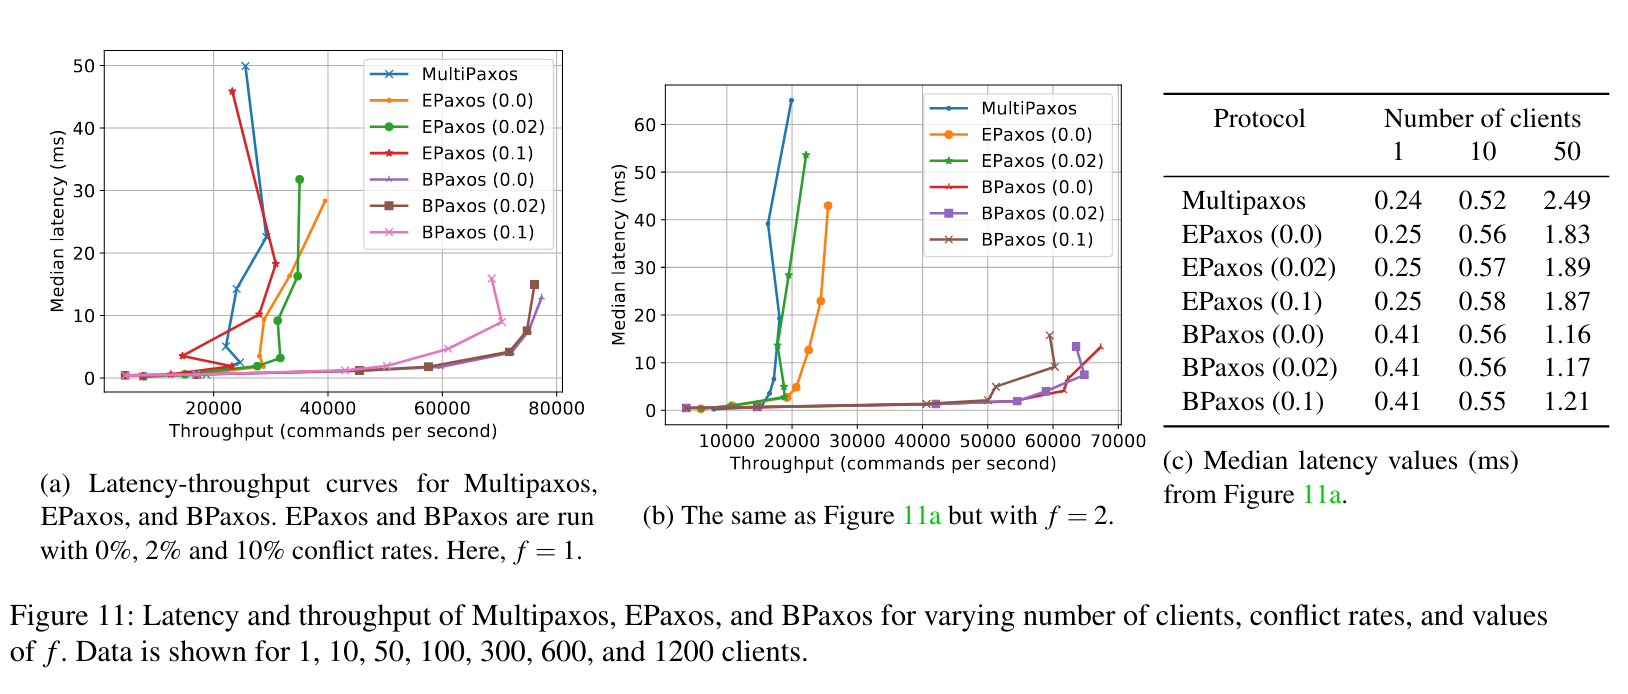 Bipartisan paxos performance comparison to Multipaxos and EPaxos